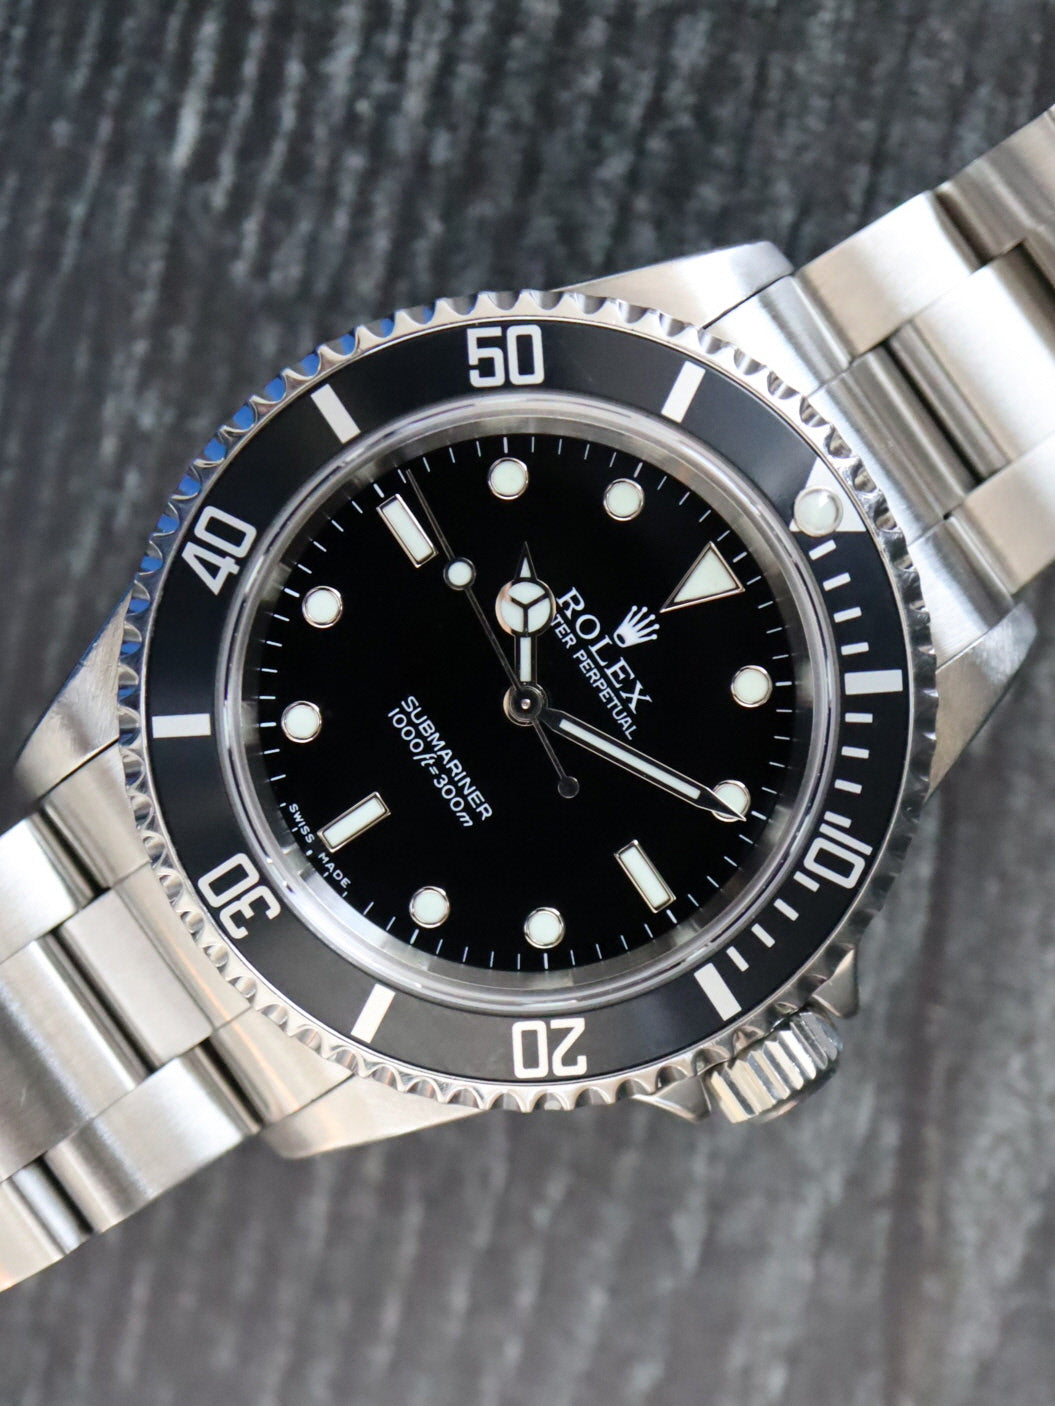 38465: Rolex Submariner "No Date", Ref. 14060M, 2004 Box and Papers – Paul Duggan Watches